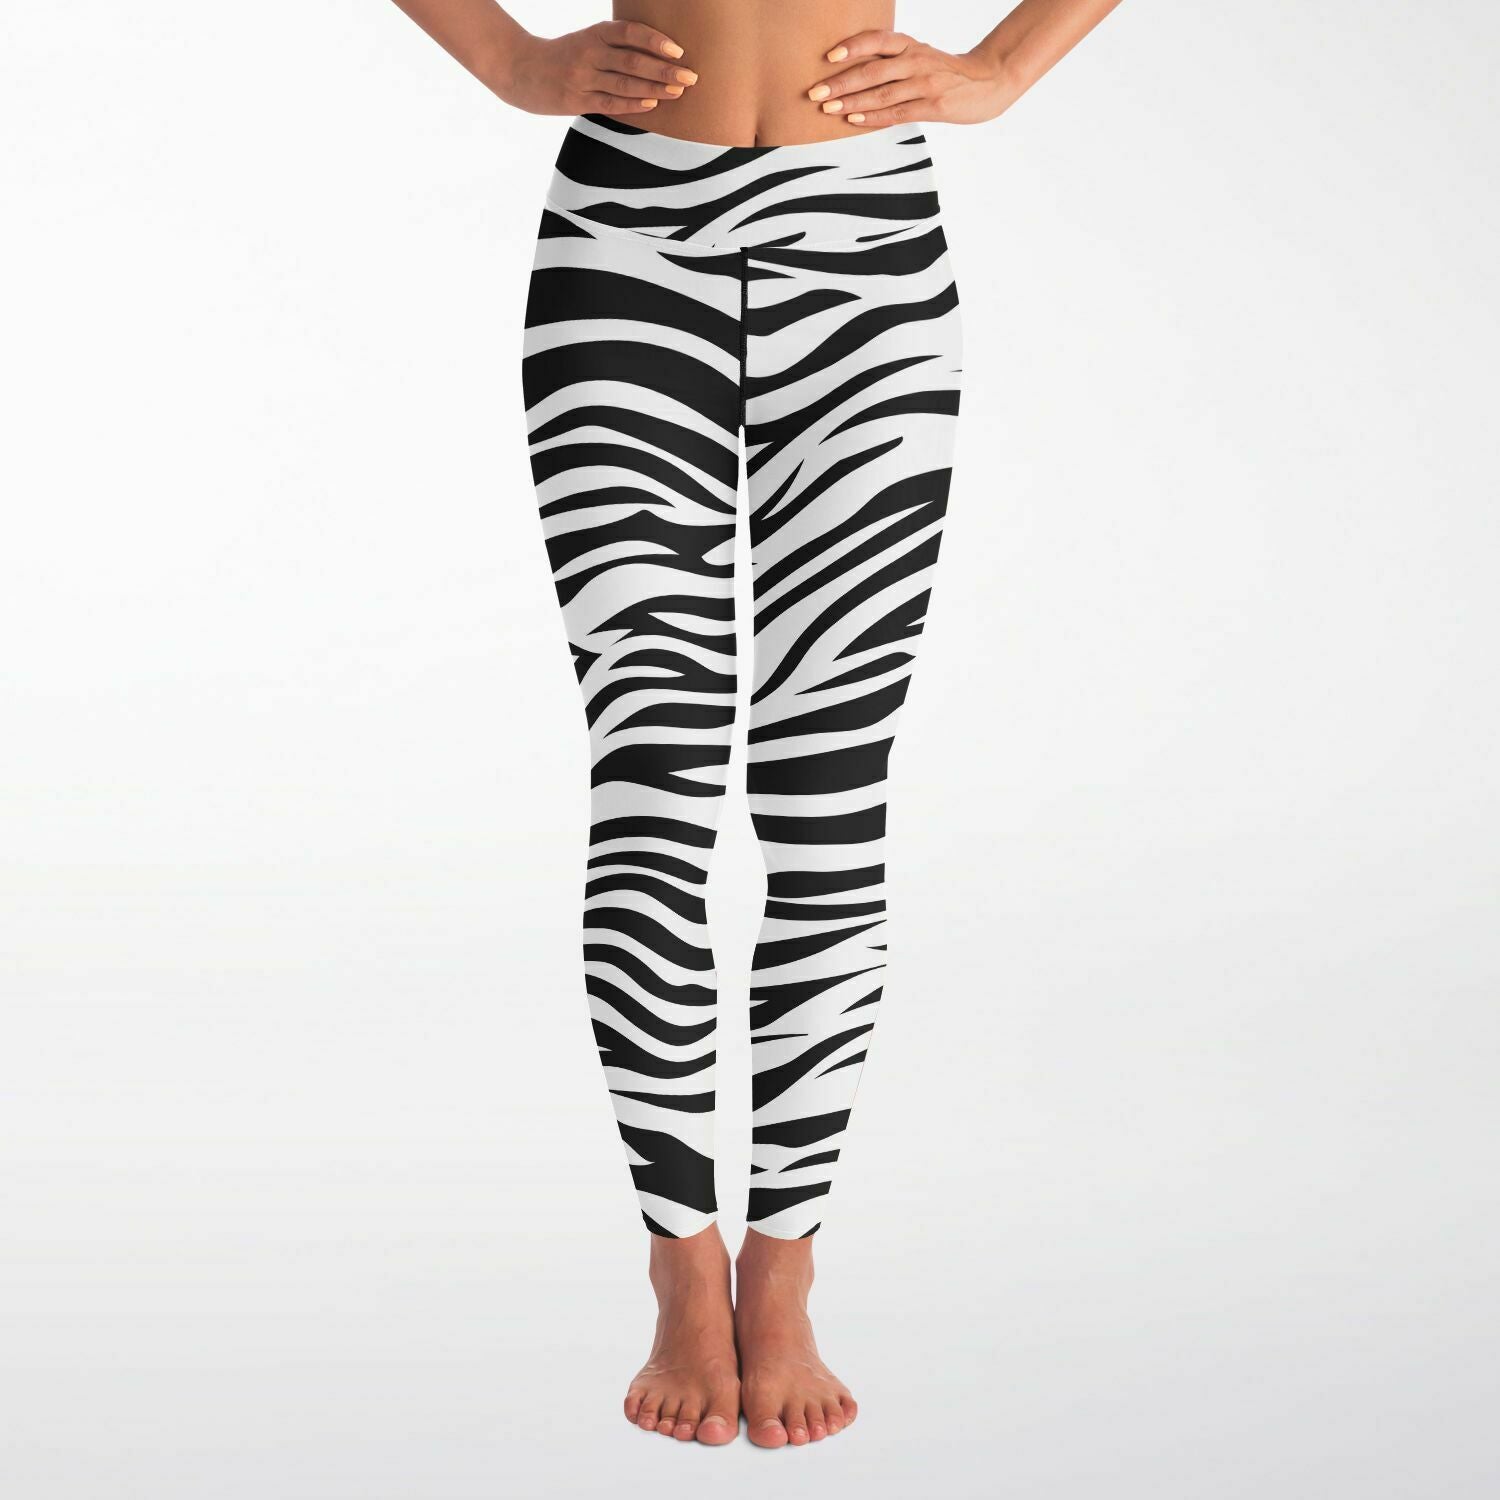 Women's Black White Bengal Eye Of Tiger Stripes Mid-rise Athletic Booty Shorts